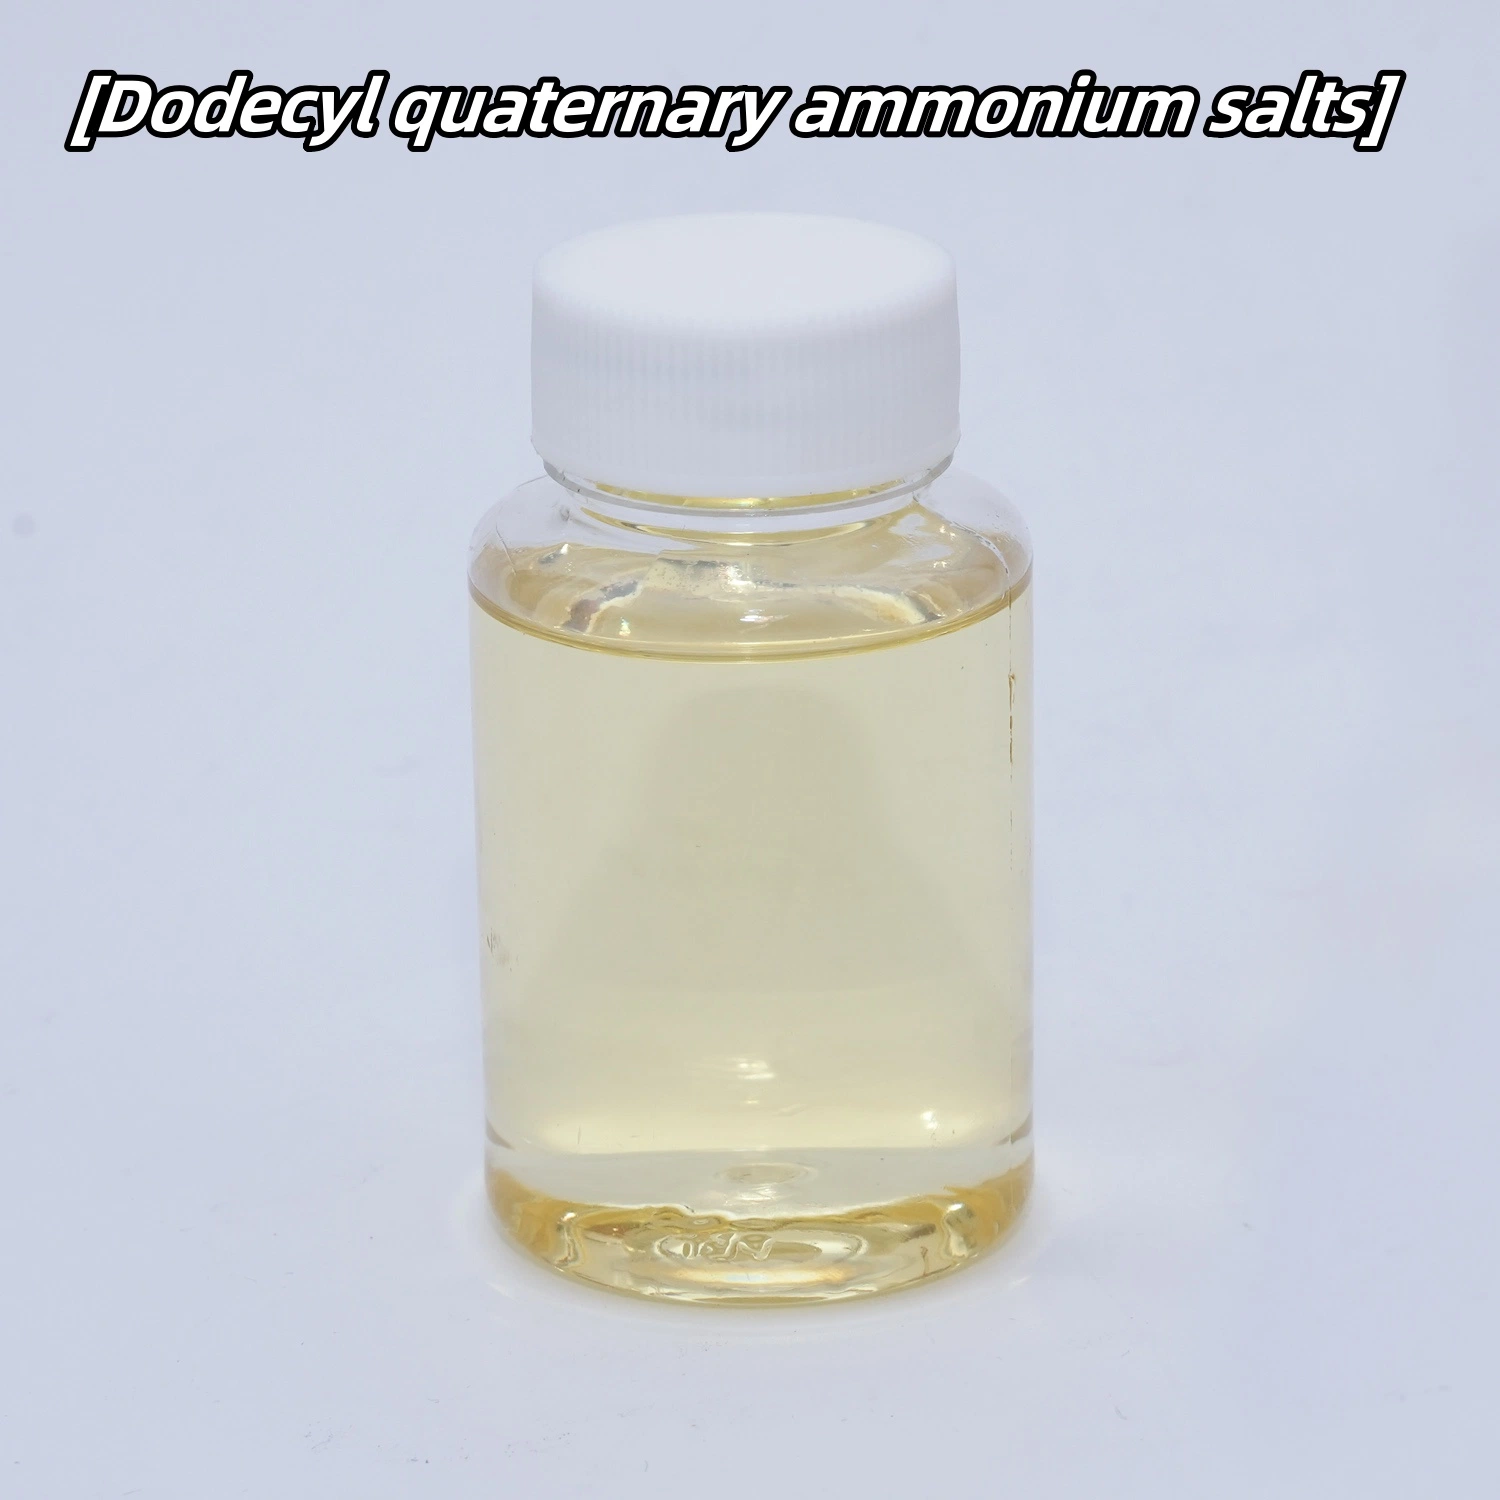 Dodecyl Quaternary Ammonium Salts; Bactericidal and Antifungal Agents; Softener; Antistatic Agents; Emulsifiers; Conditioner